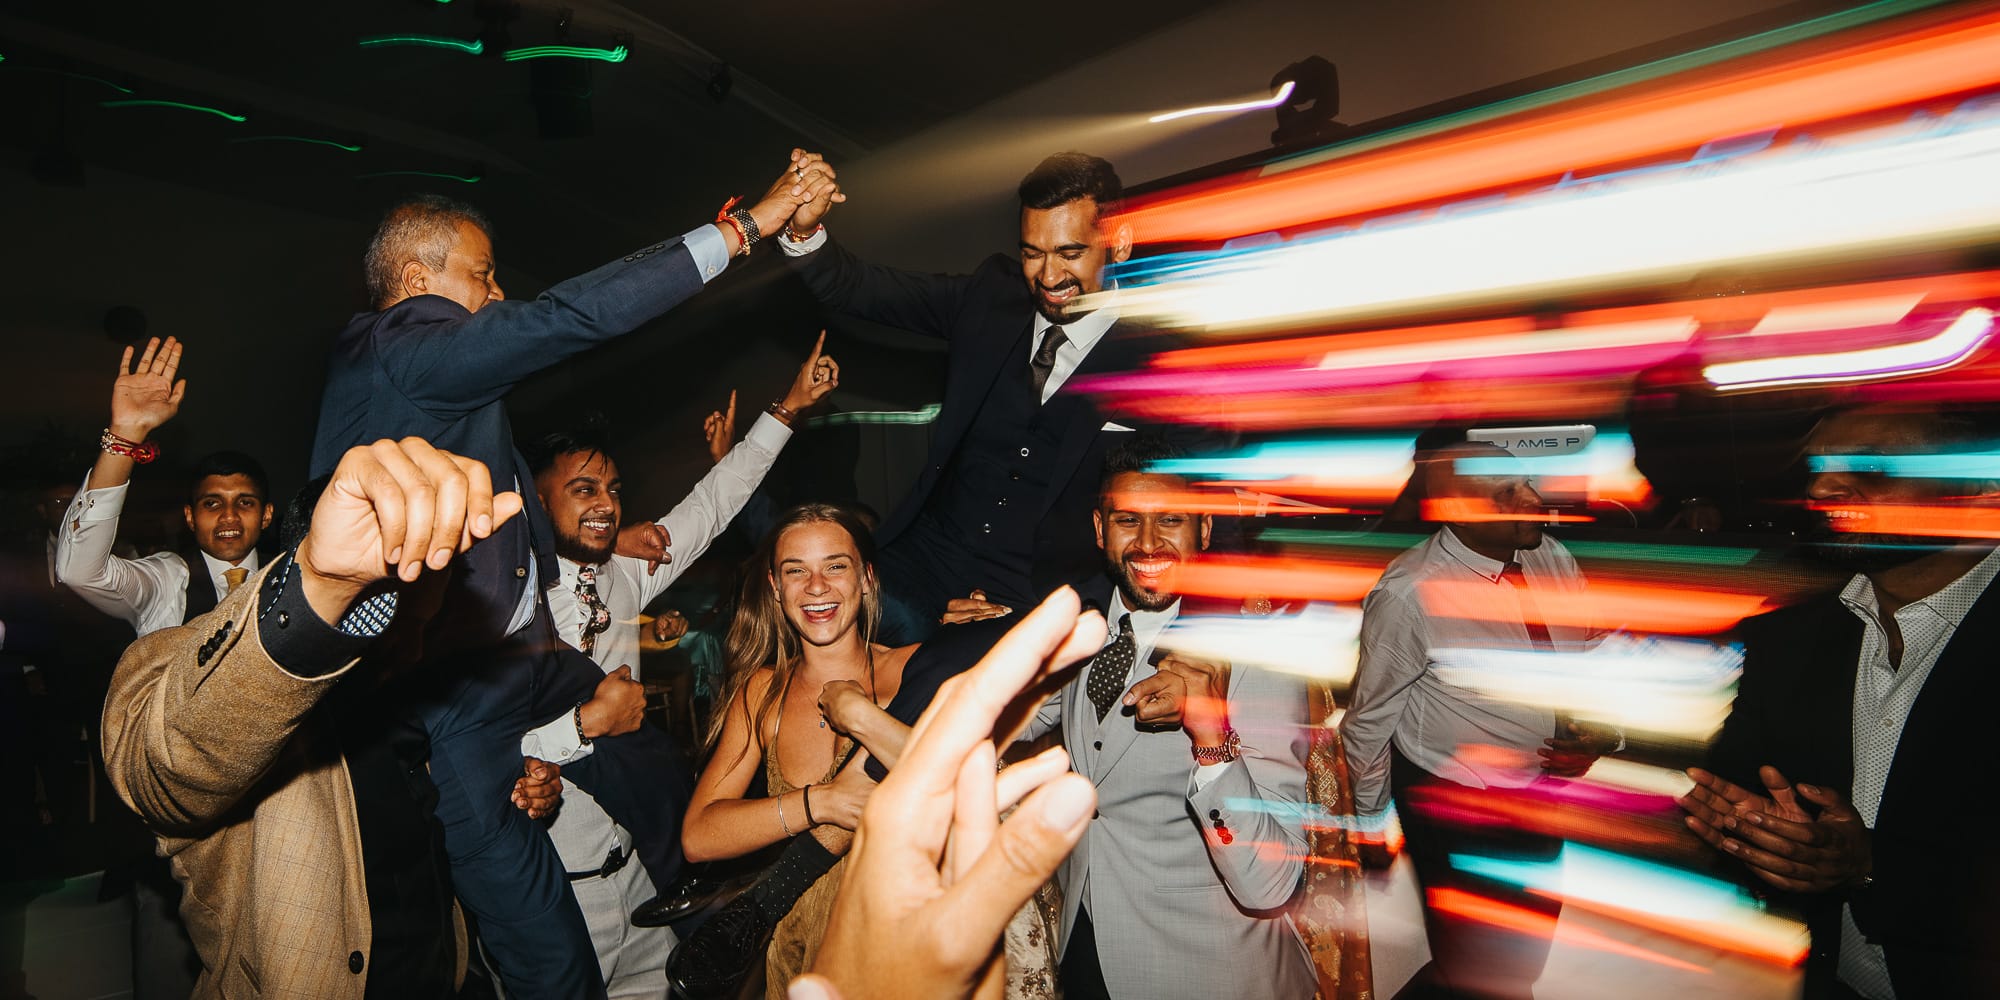 Wedding guests partying on dance floor and holding asian groom on shoulders